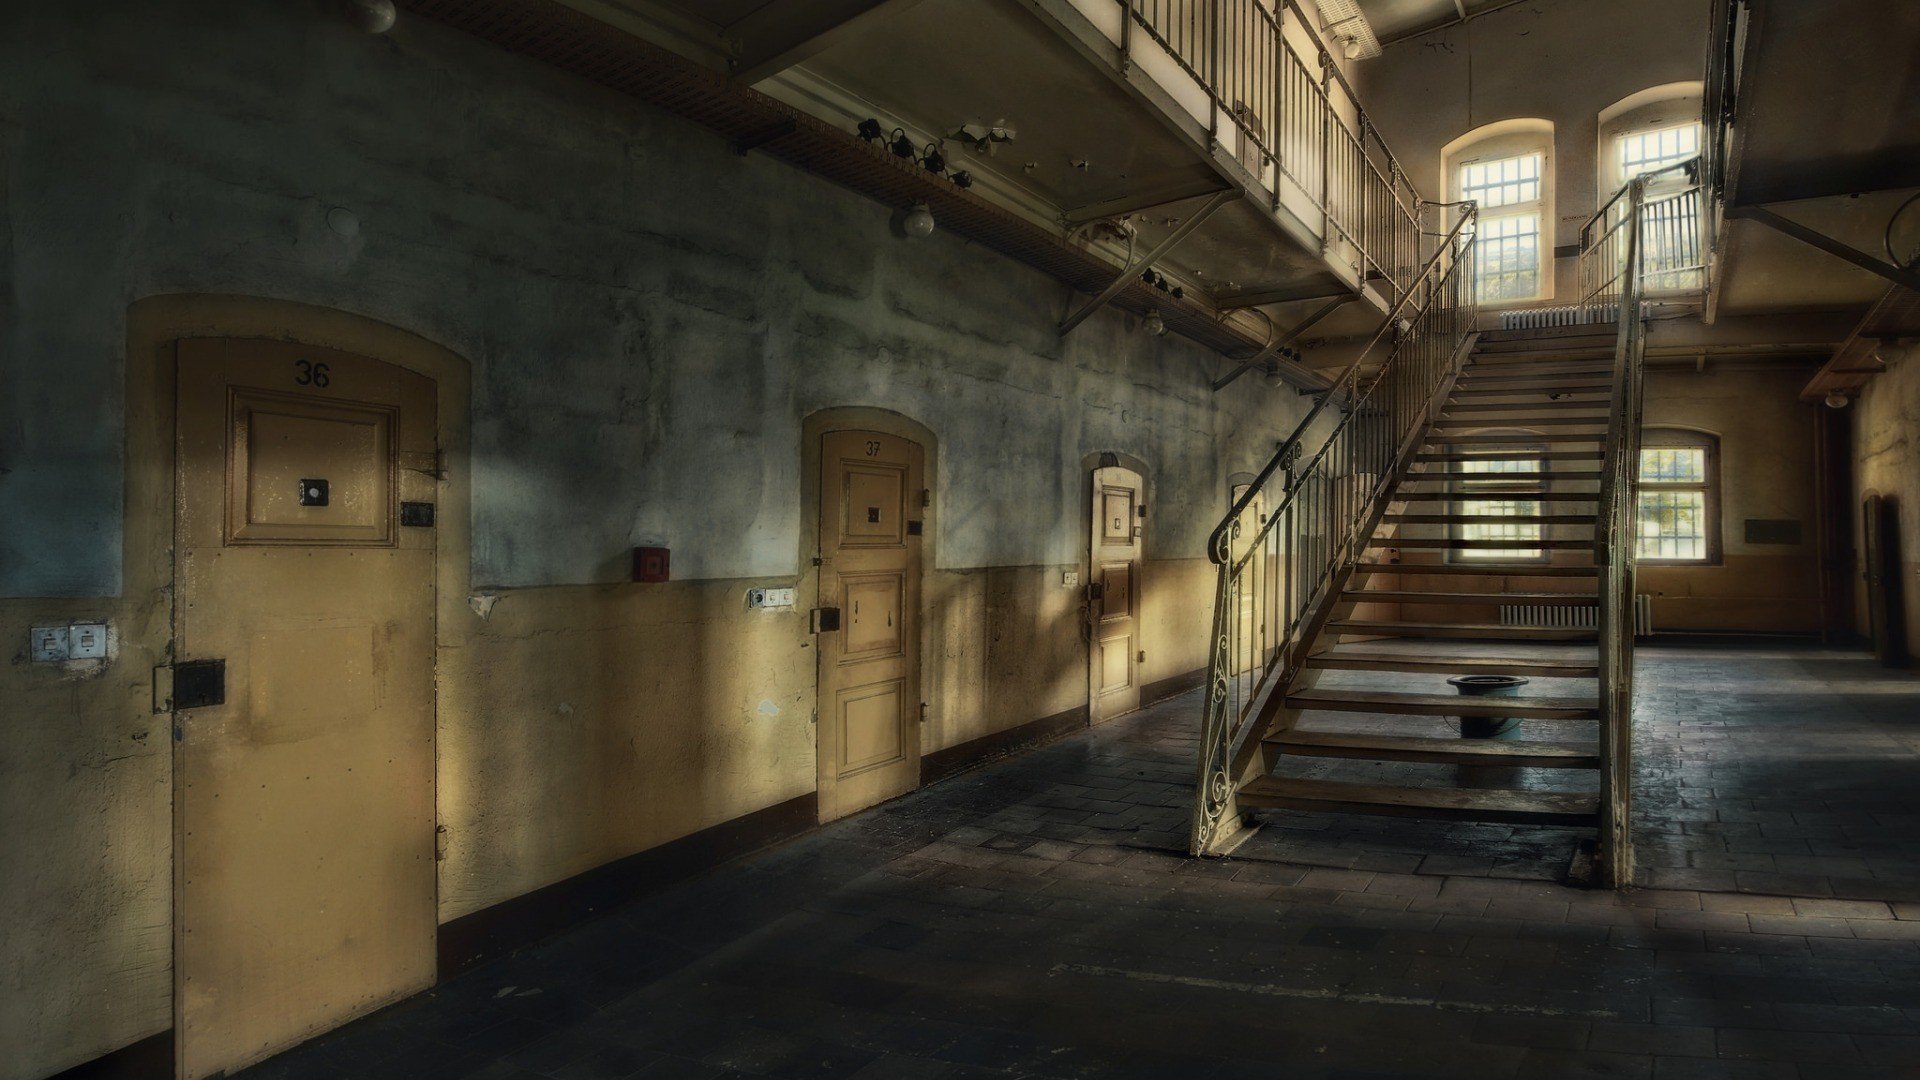 architecture, Interiors, Abandoned, Silent, Prison, Door, Window, Stairs, Hallway, Natural light Wallpaper